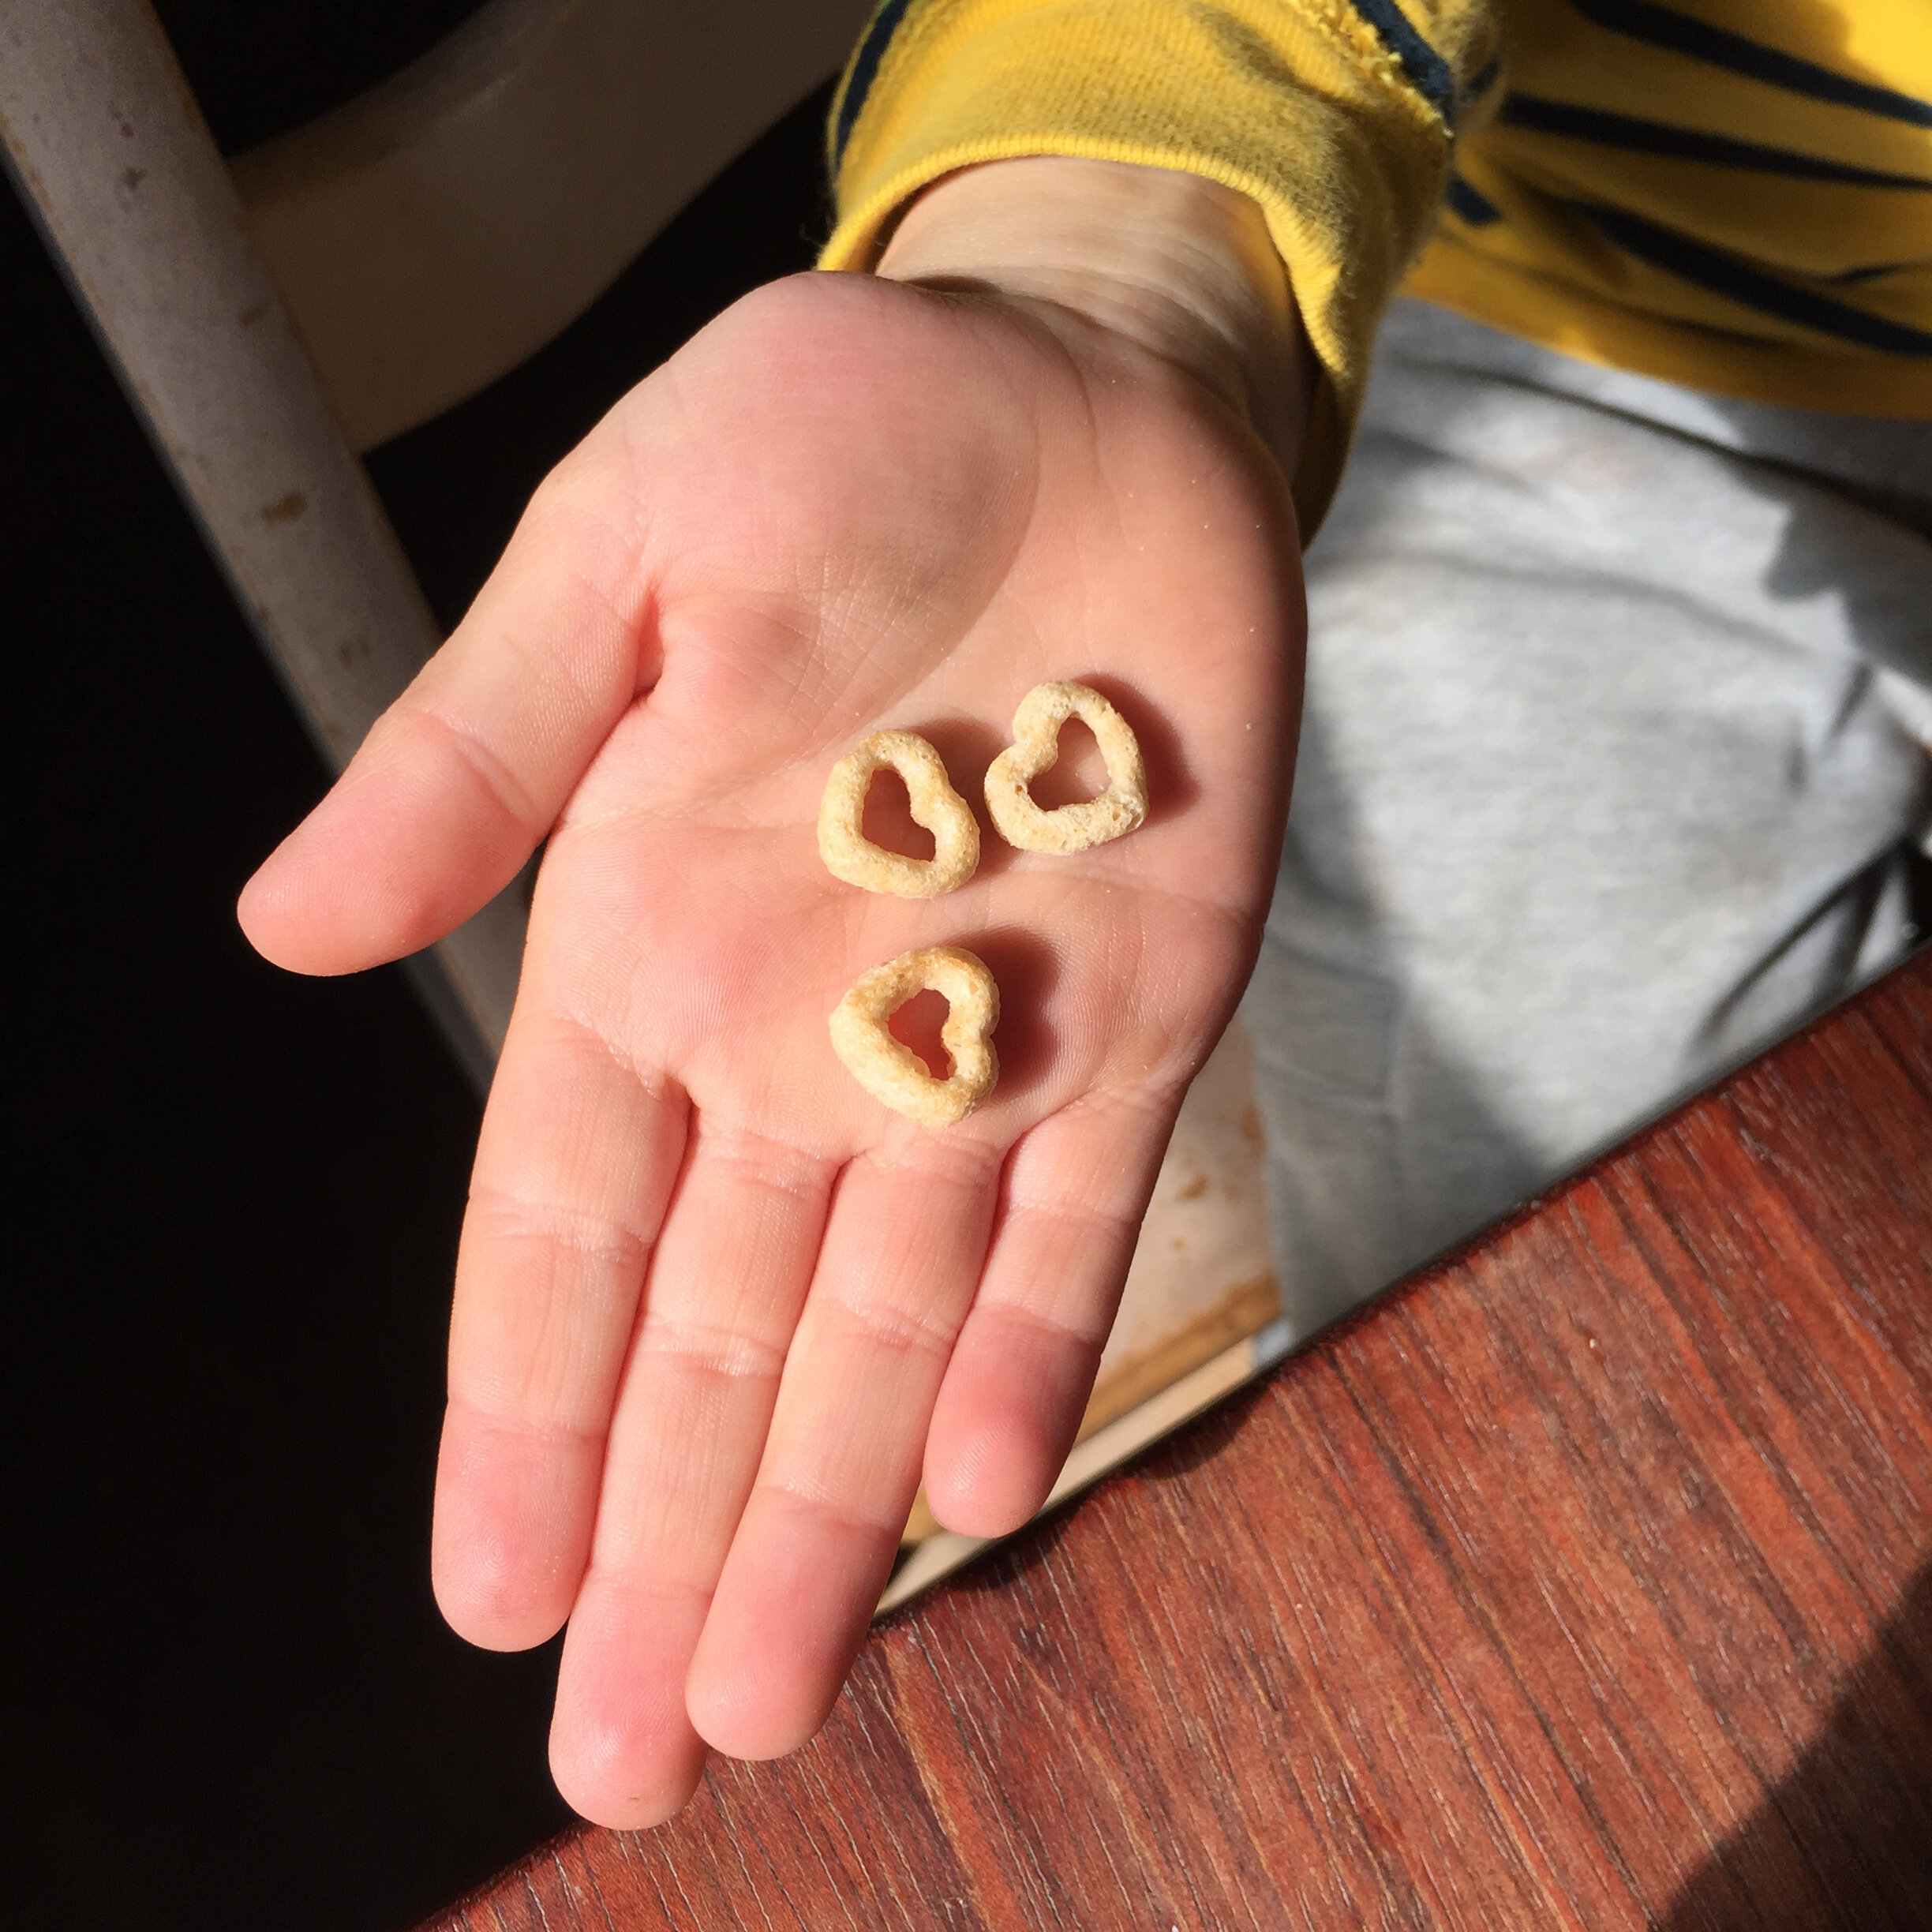  Alice Shaw, “Stuck in the house picture #4” - Like almost every child, my 4 1/2 year old son loves Cheerios. He was delighted when they started making some of them into the shape of hearts.&nbsp; 